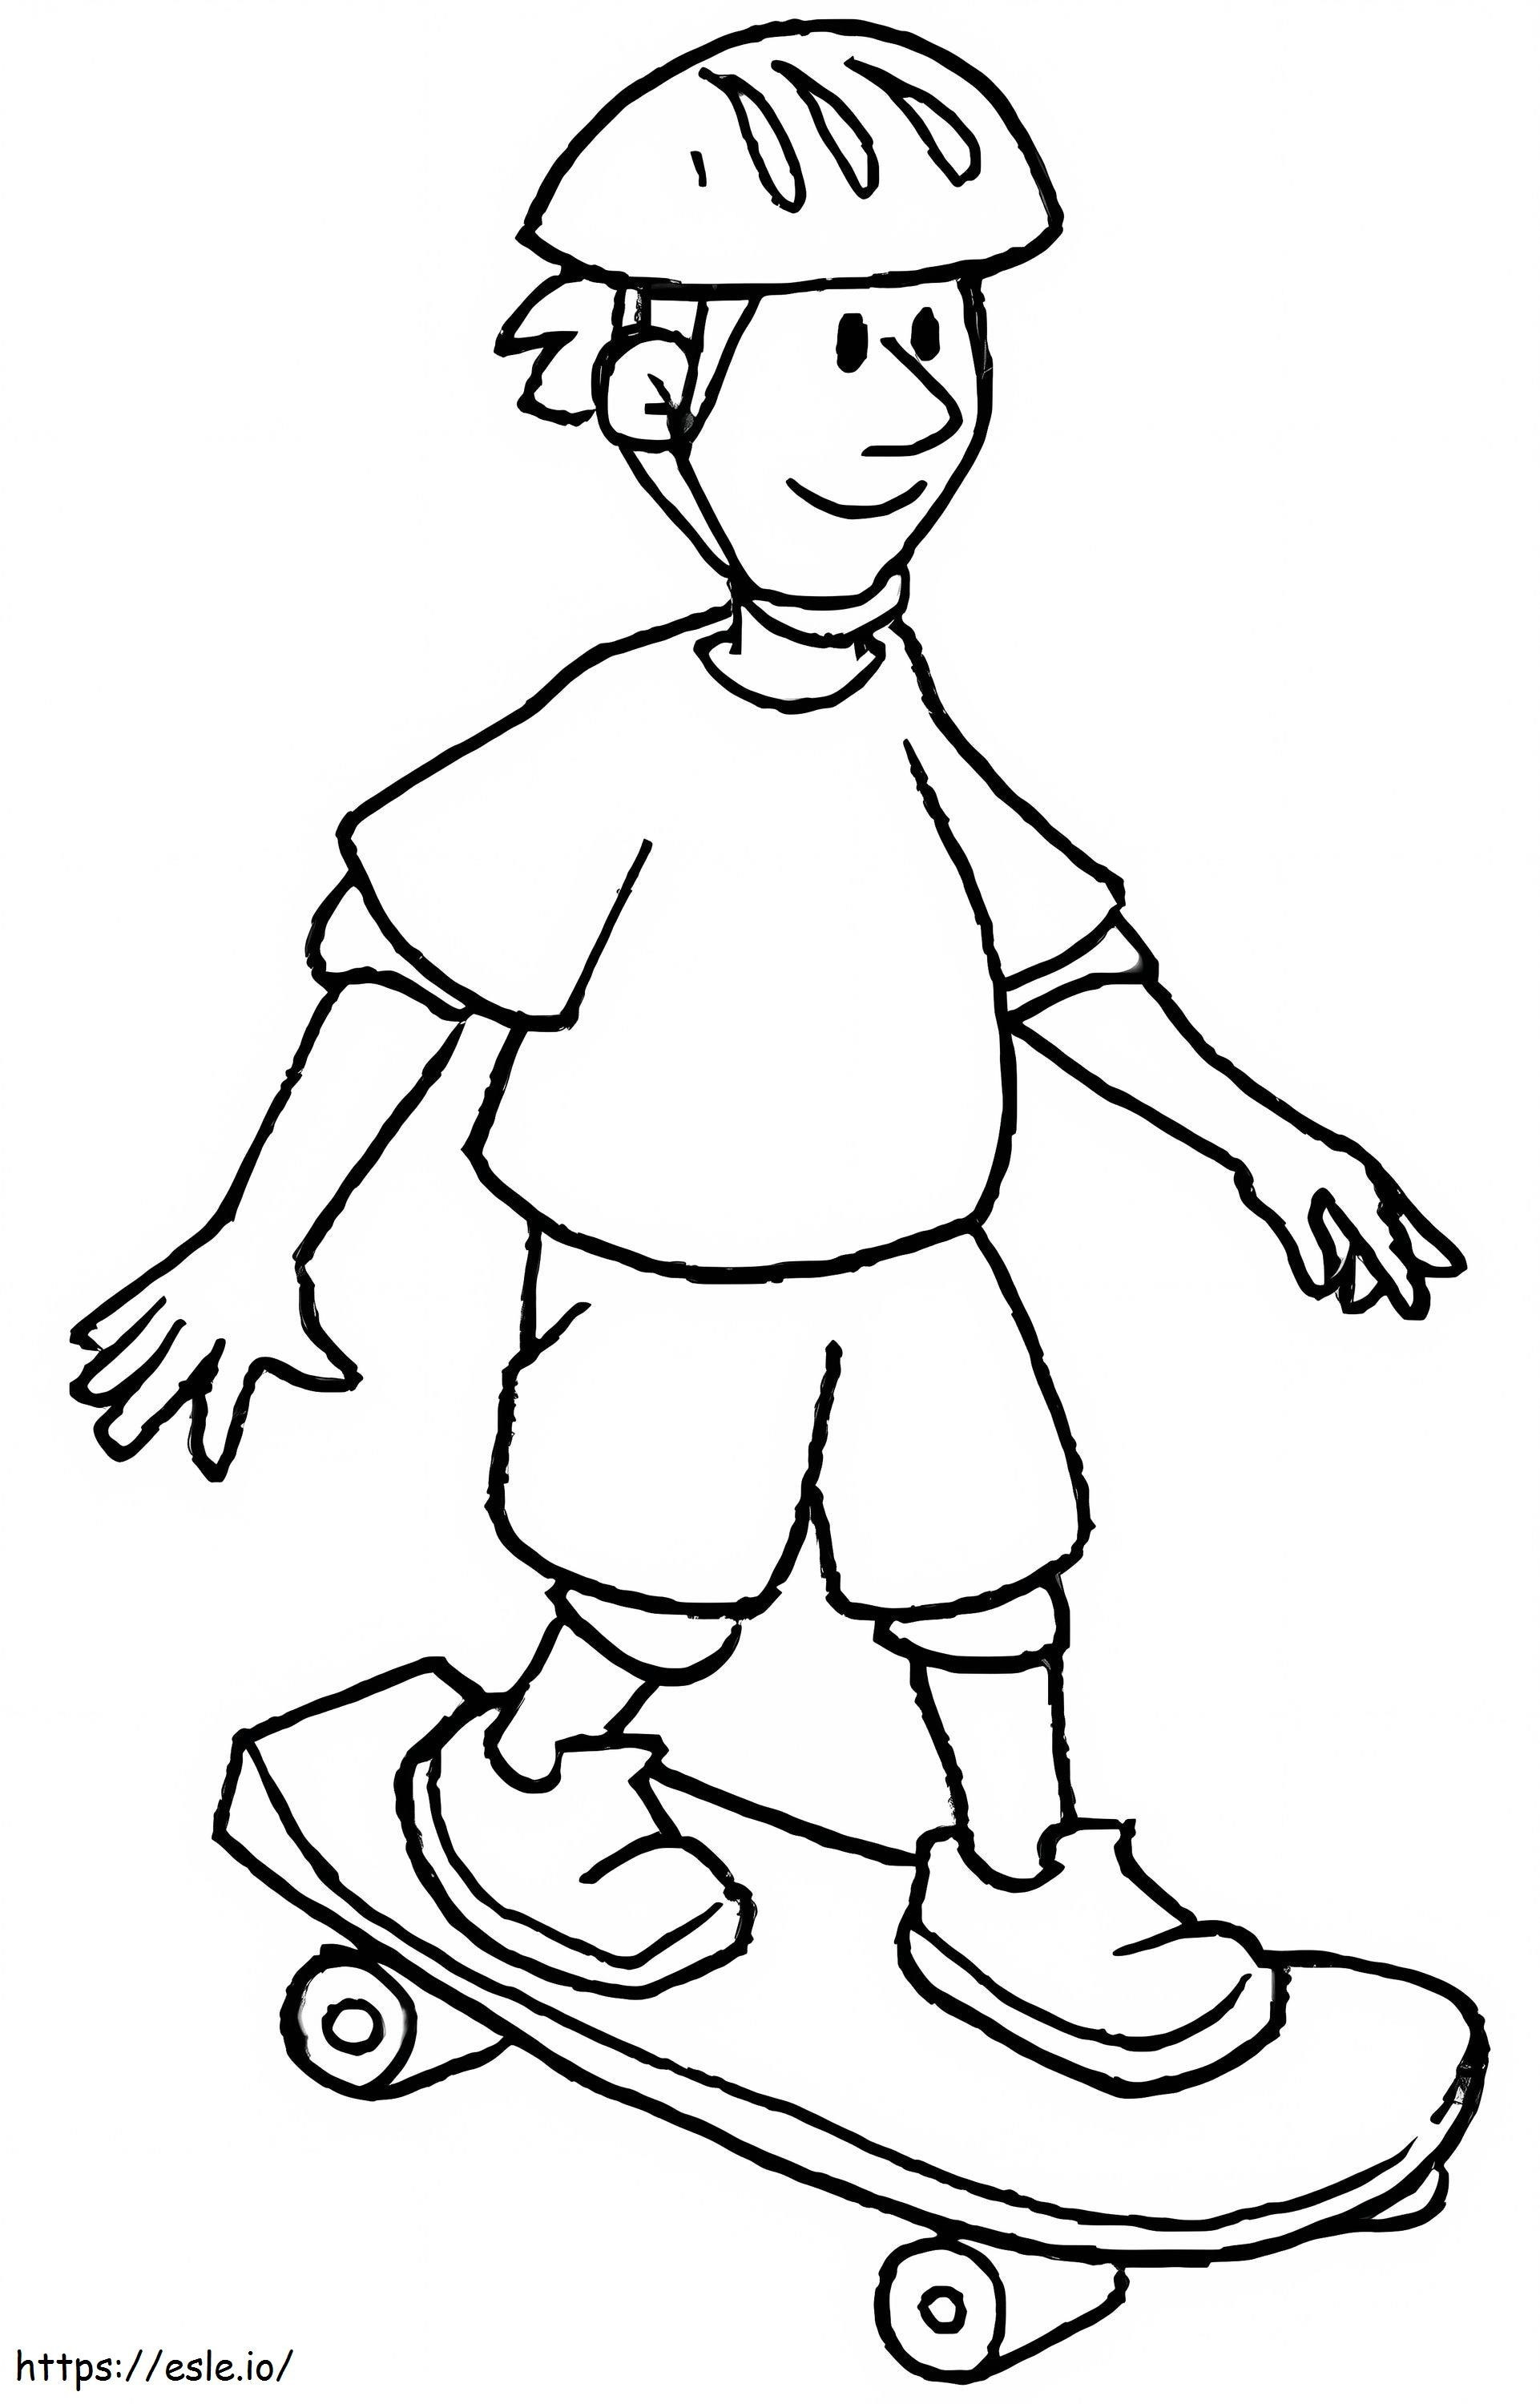 A Guy On Skateboard coloring page